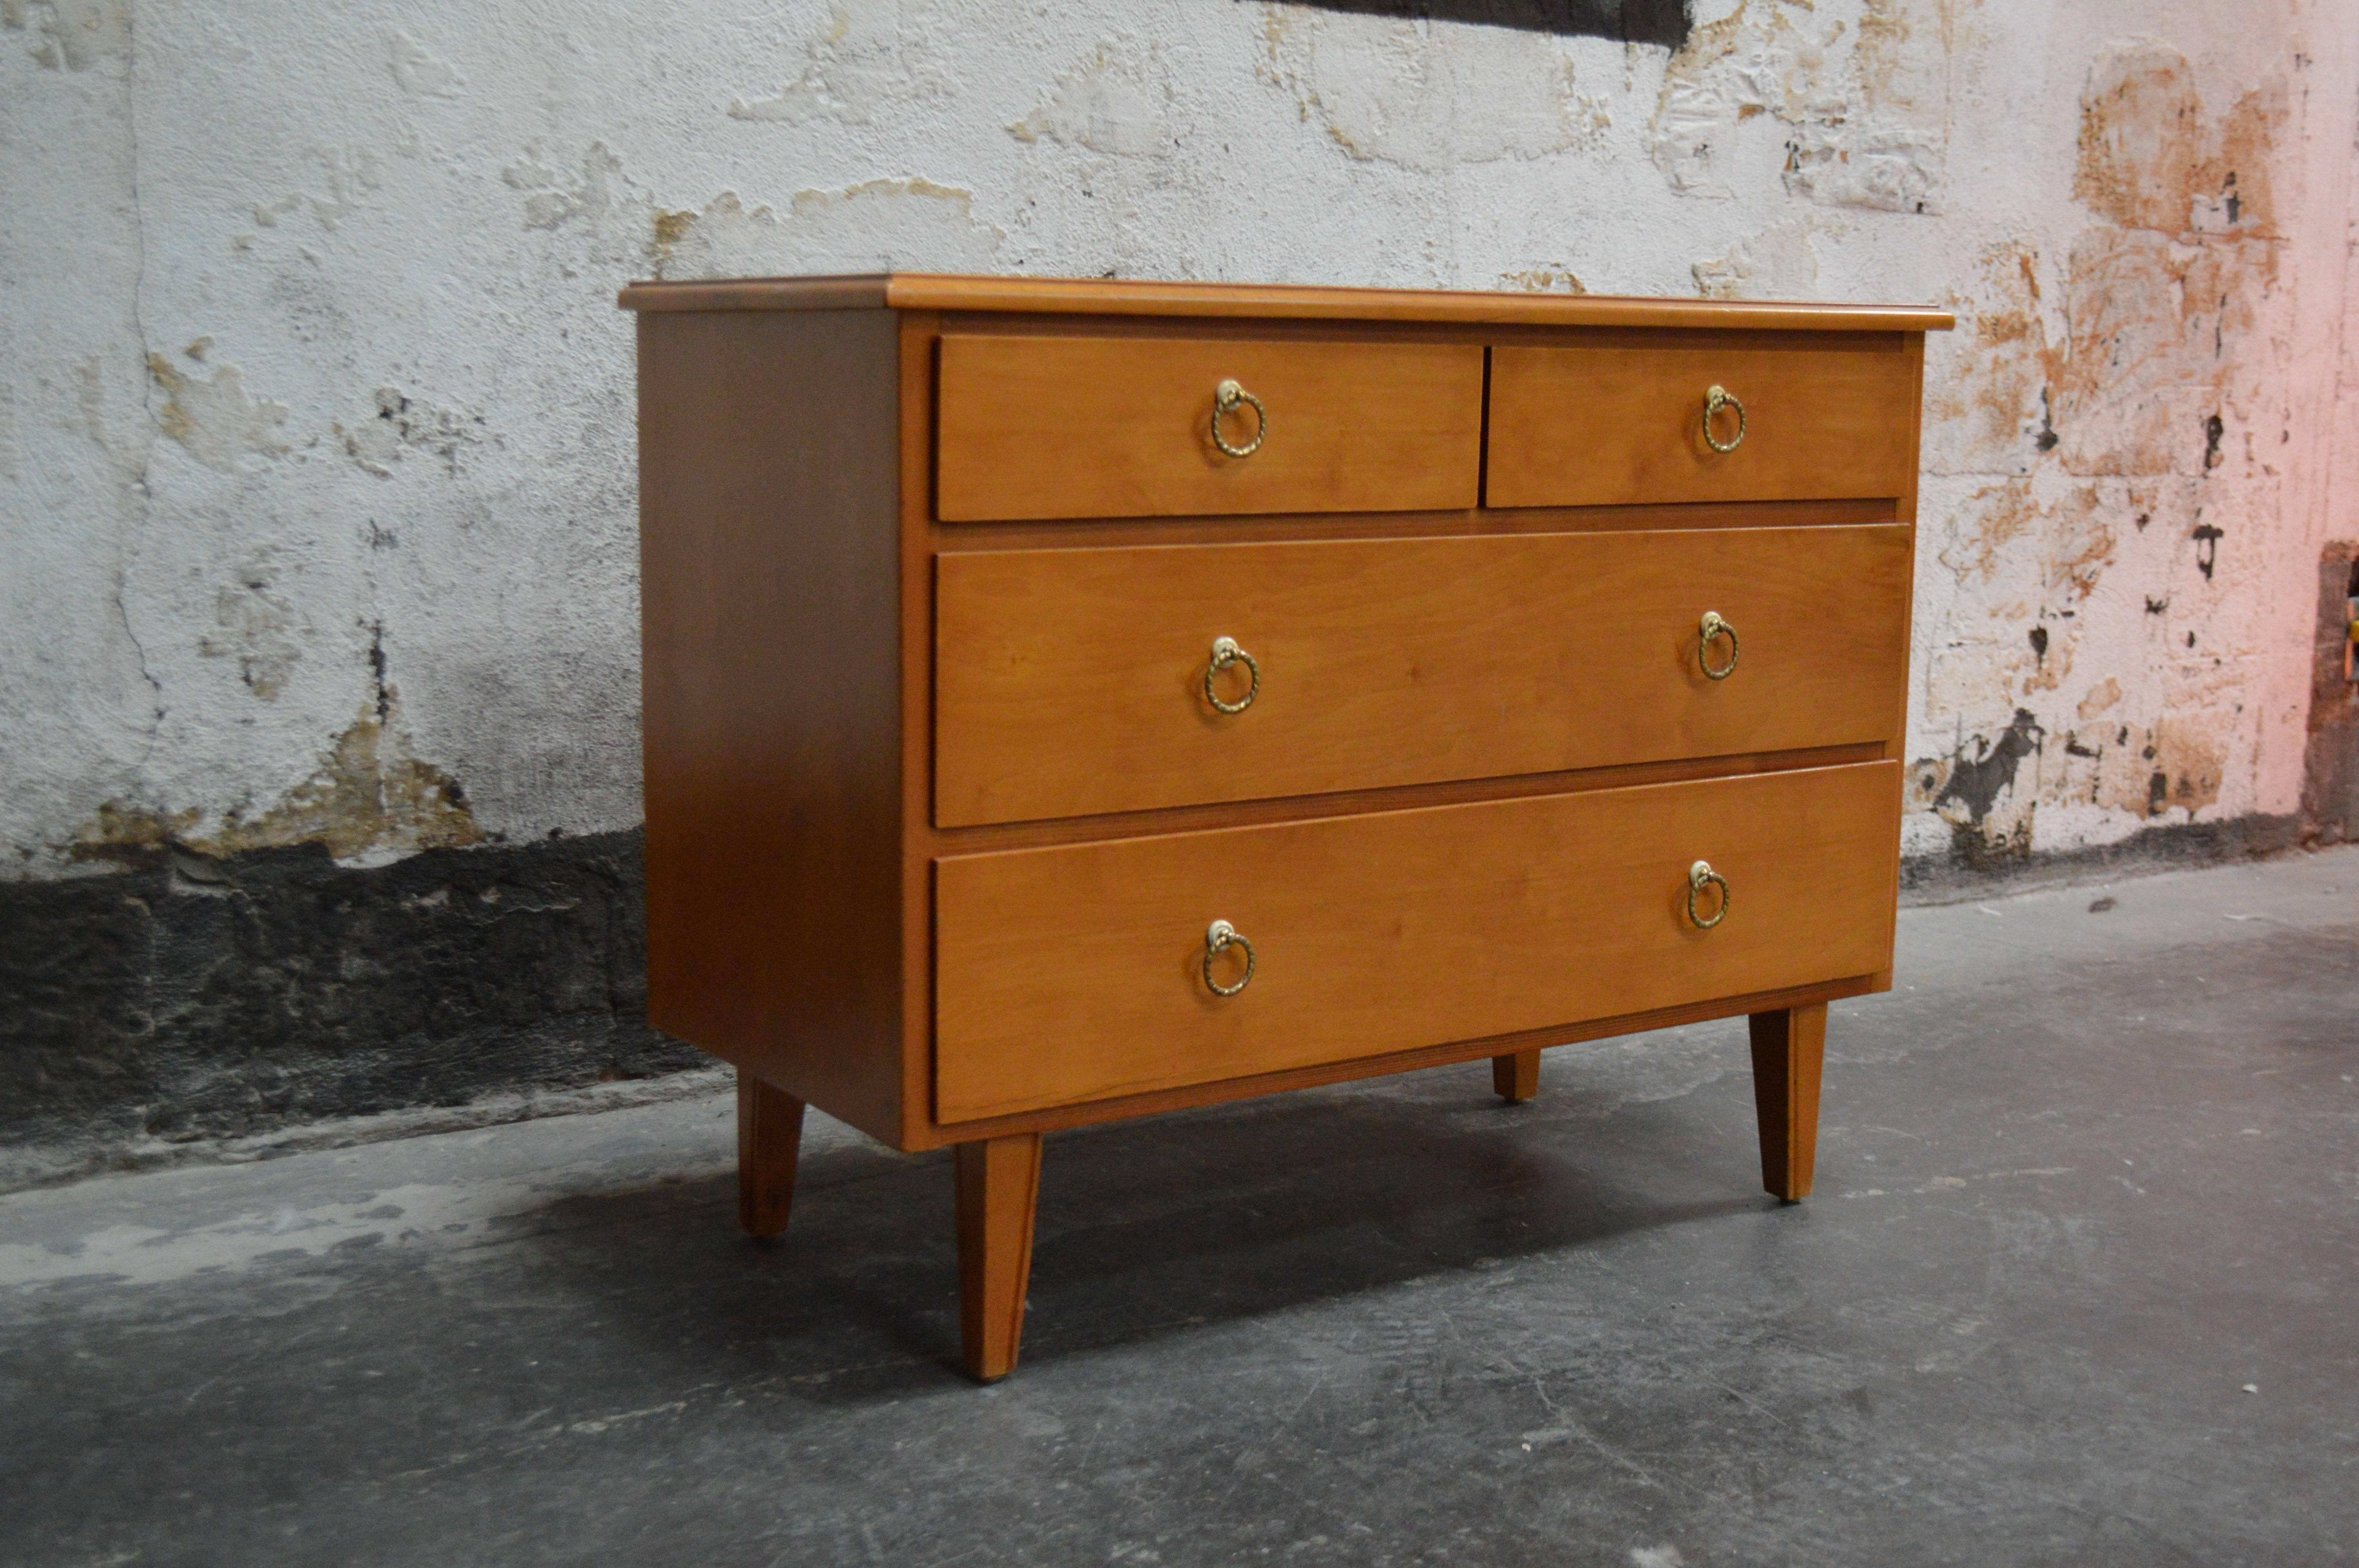 Handsome chest of drawers rendered in golden elm. Five dove-tailed drawers with ample storage. Twisted aged brass pulls with white bakelite details. Works nicely as a nightstand as well.